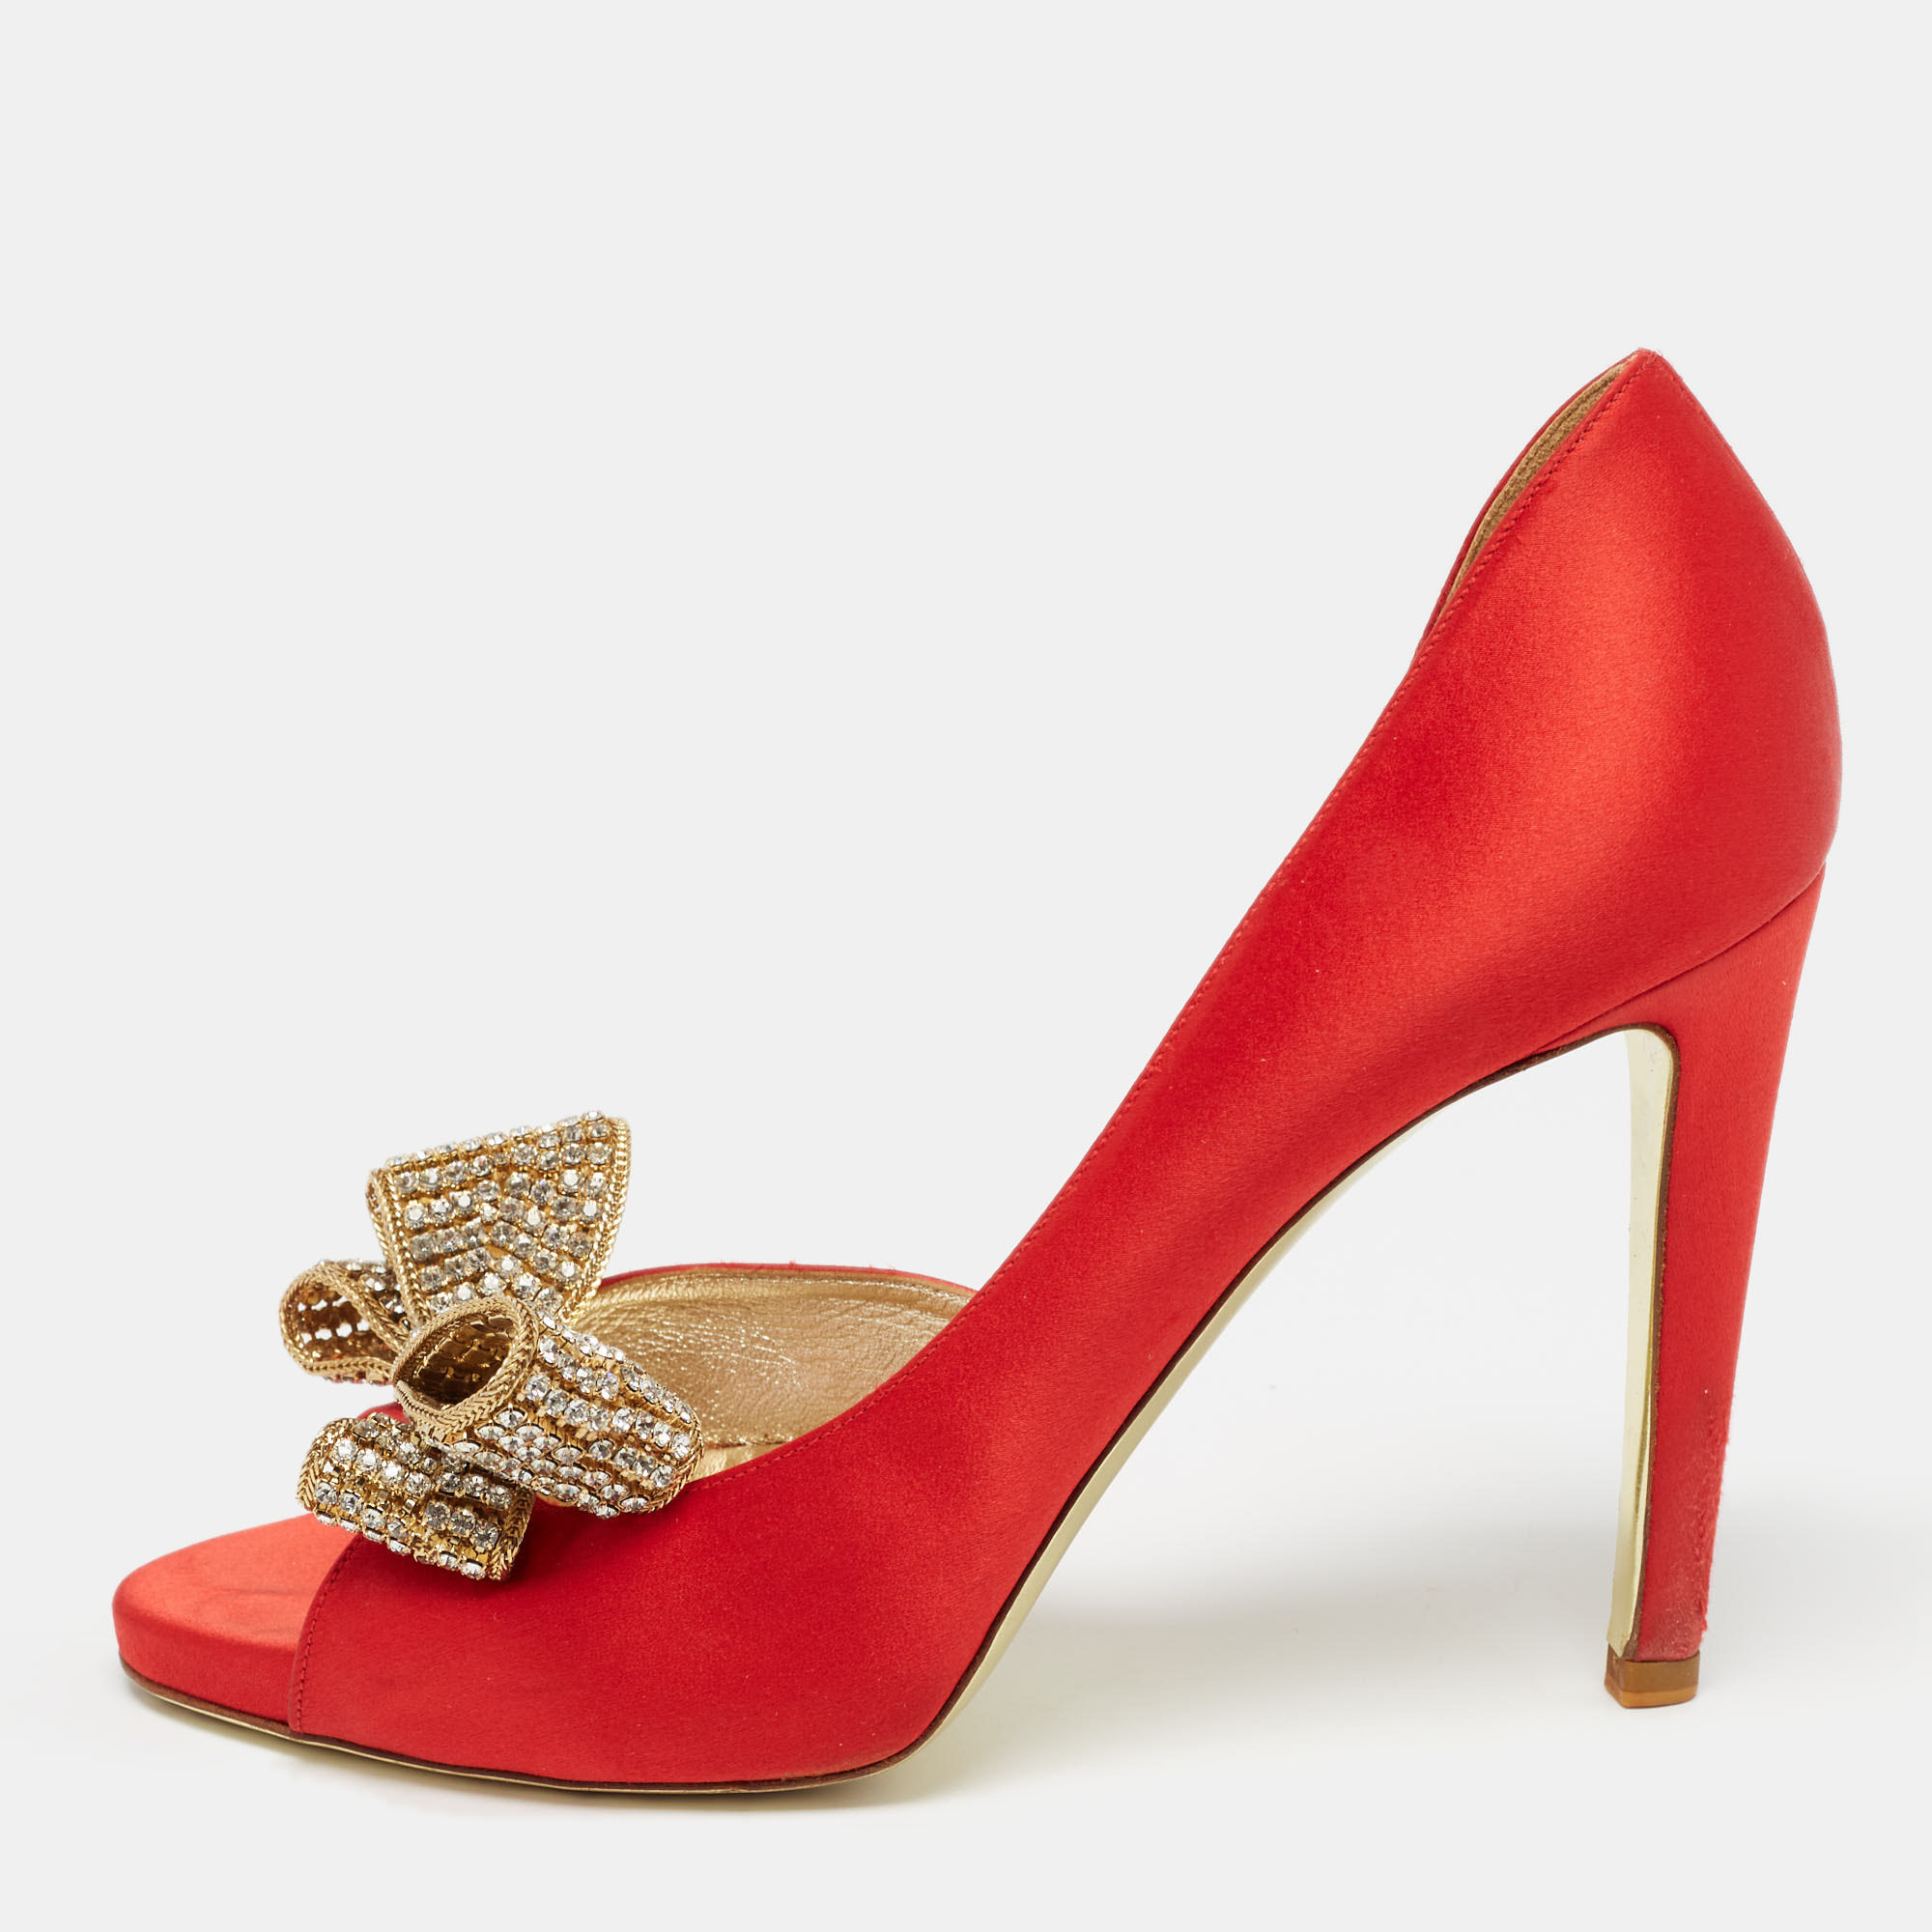 Valentino red satin crystal embellished bow d'orsay pumps size 38.5